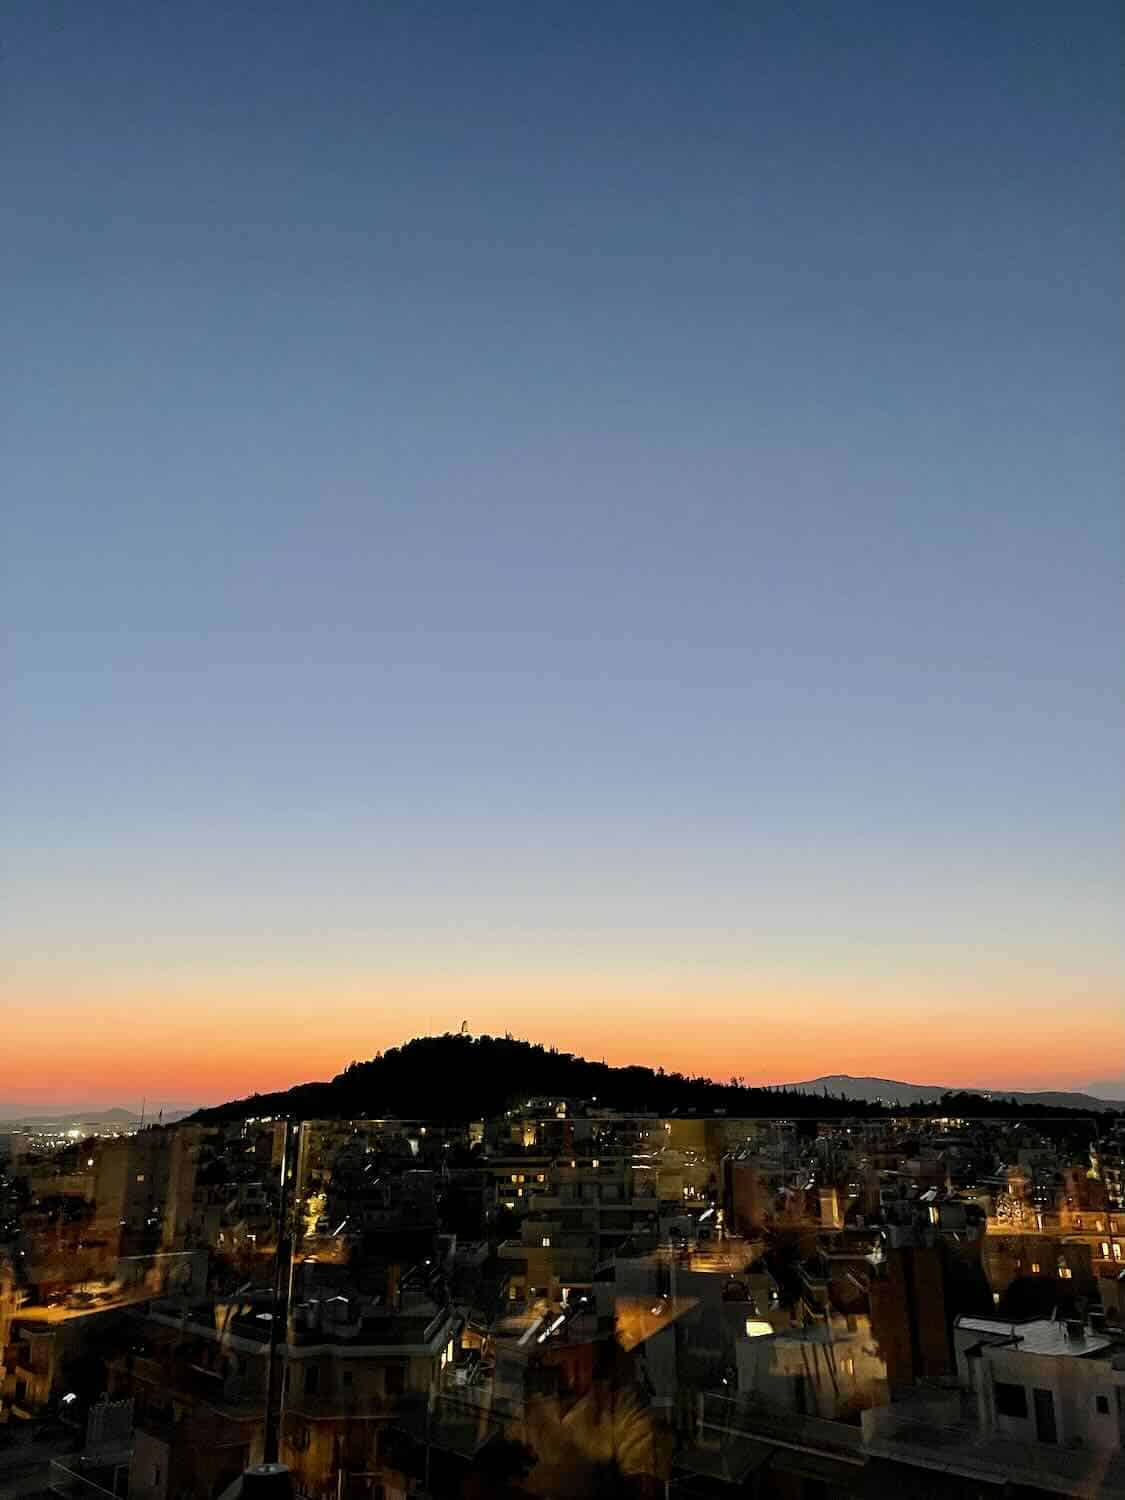 A view of Athens at sunset with Mount Lycabettus silhouetted against a colorful sky transitioning from orange to deep blue.